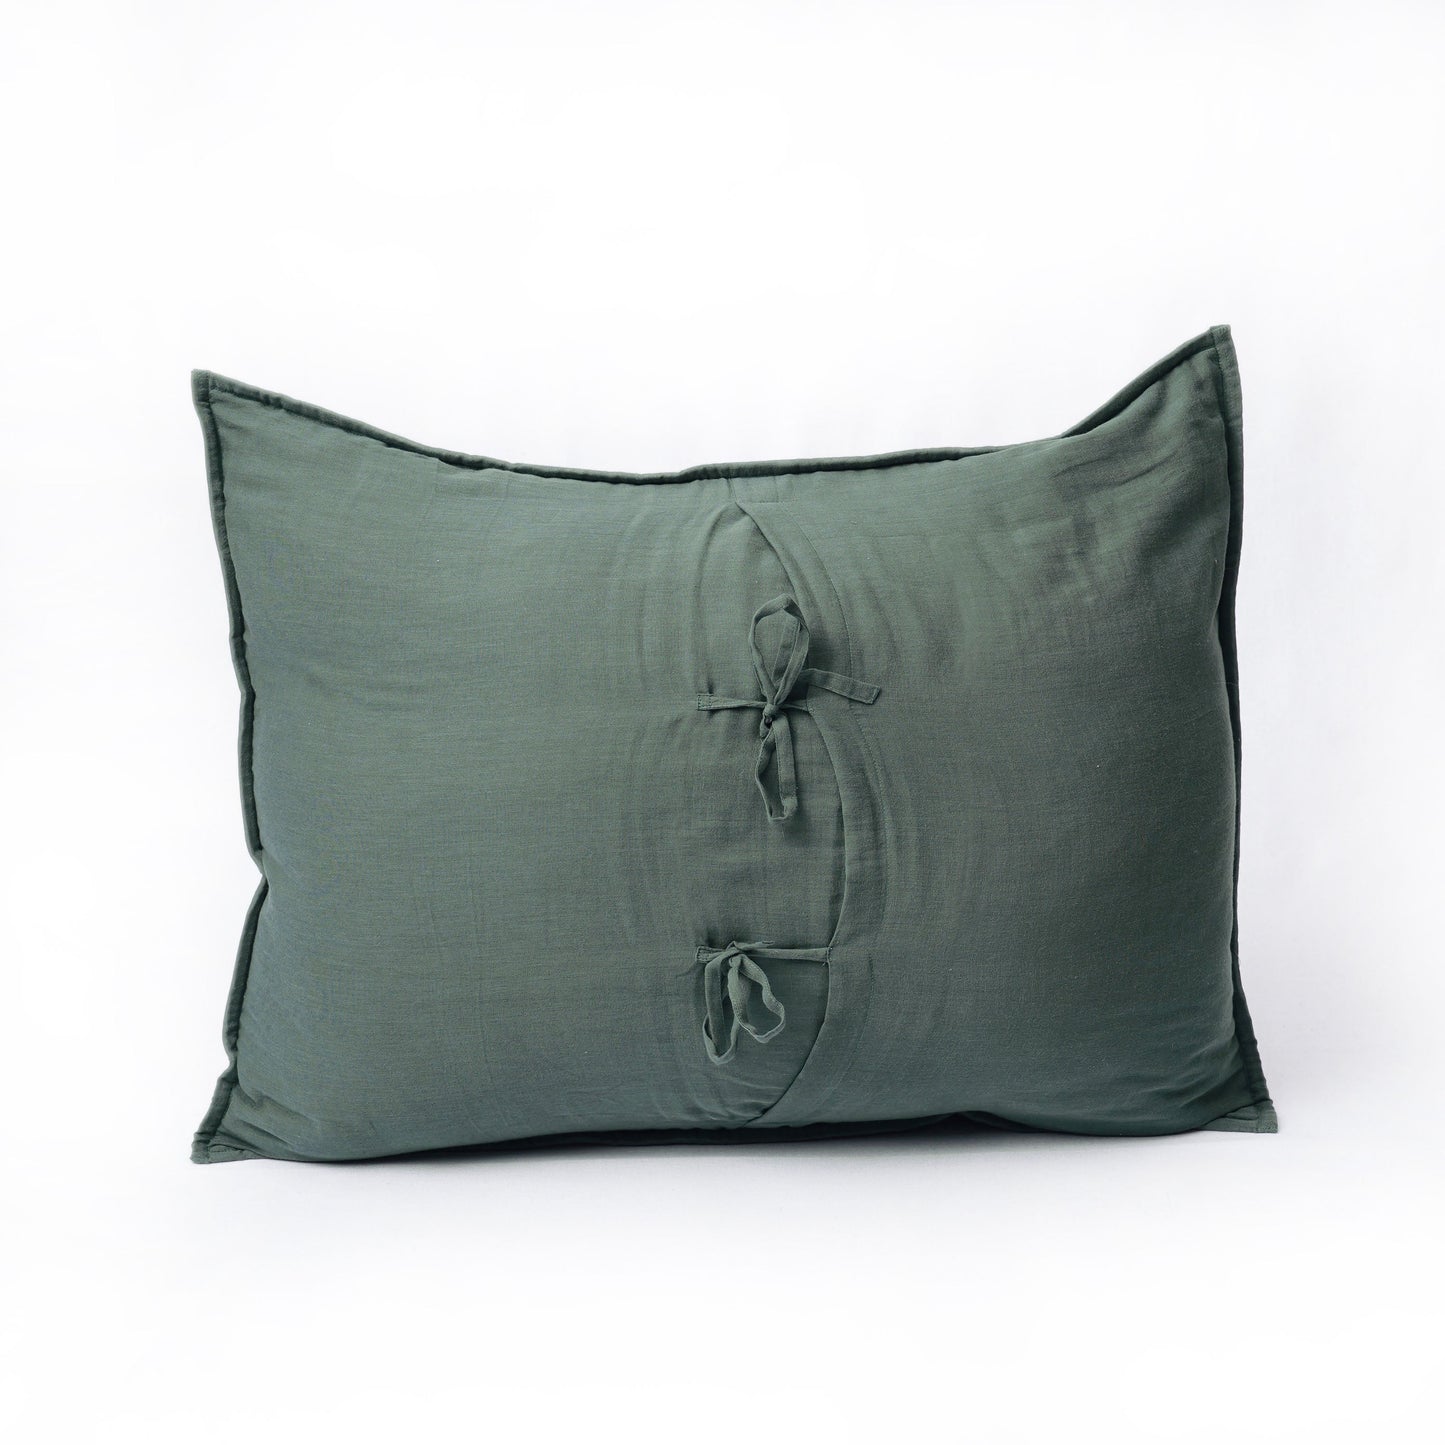 Olive Green quilted pillow shams - hand quilted 4 layer muslin gauze, sizes available